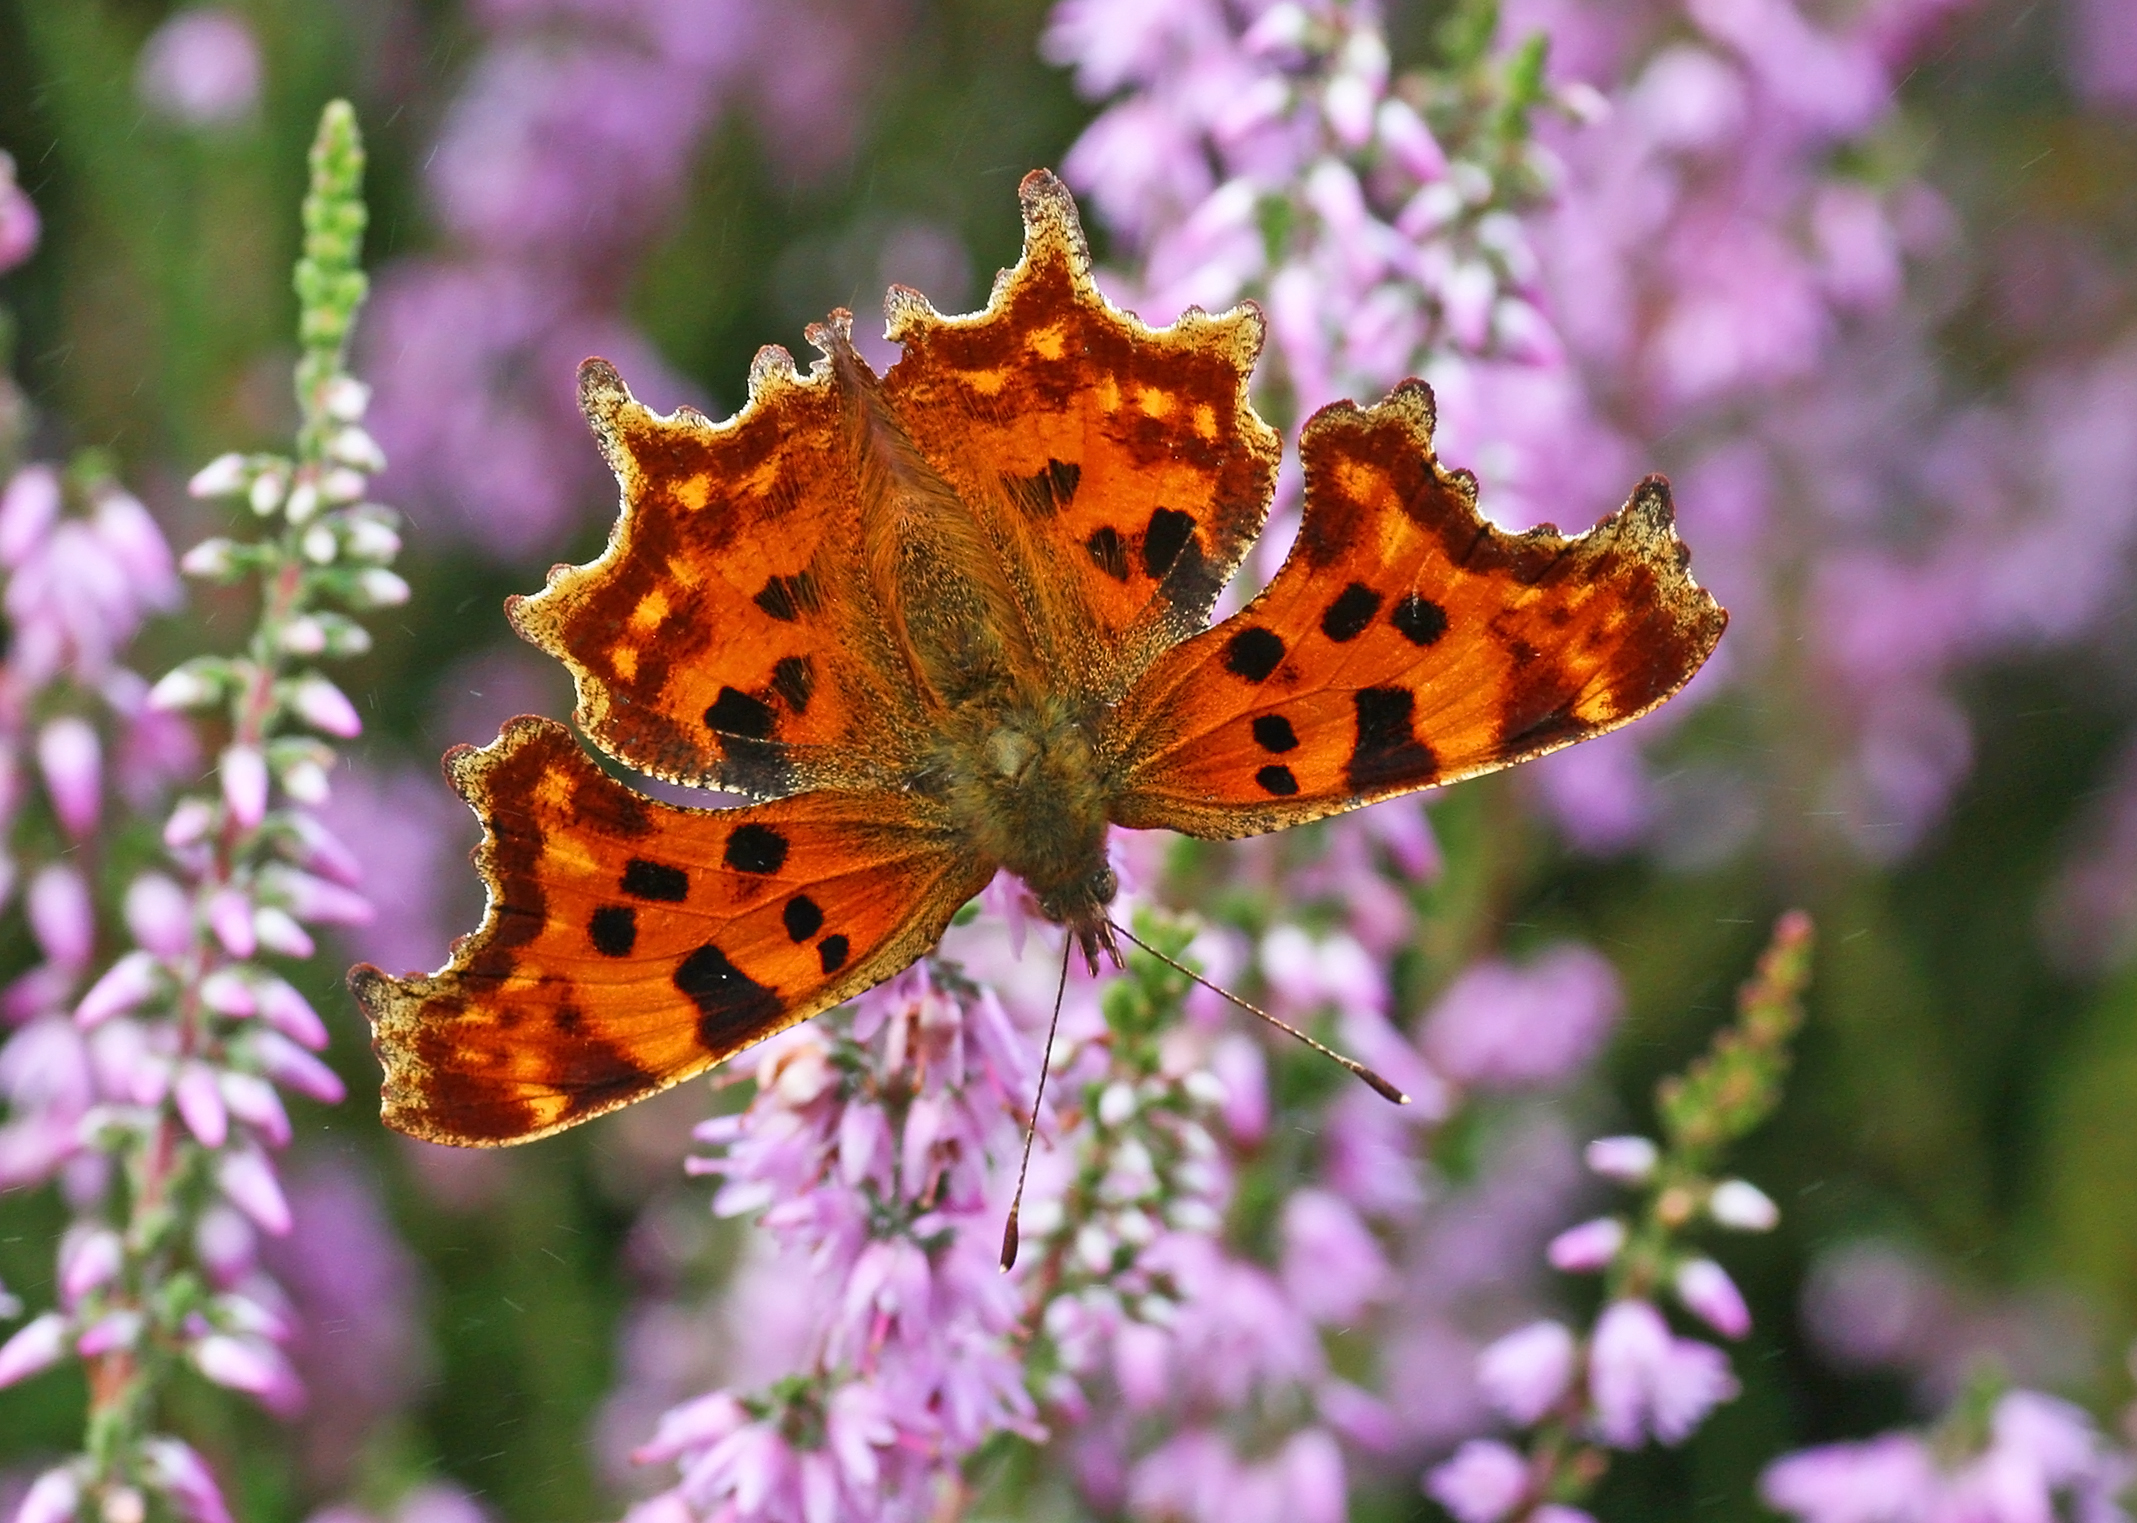 Image: The comma butterfly is a rapidly expanding species which occurs across England and Wales and can now be found in southern Scotland. Credit: Matt Berry/Butterfly Conservation